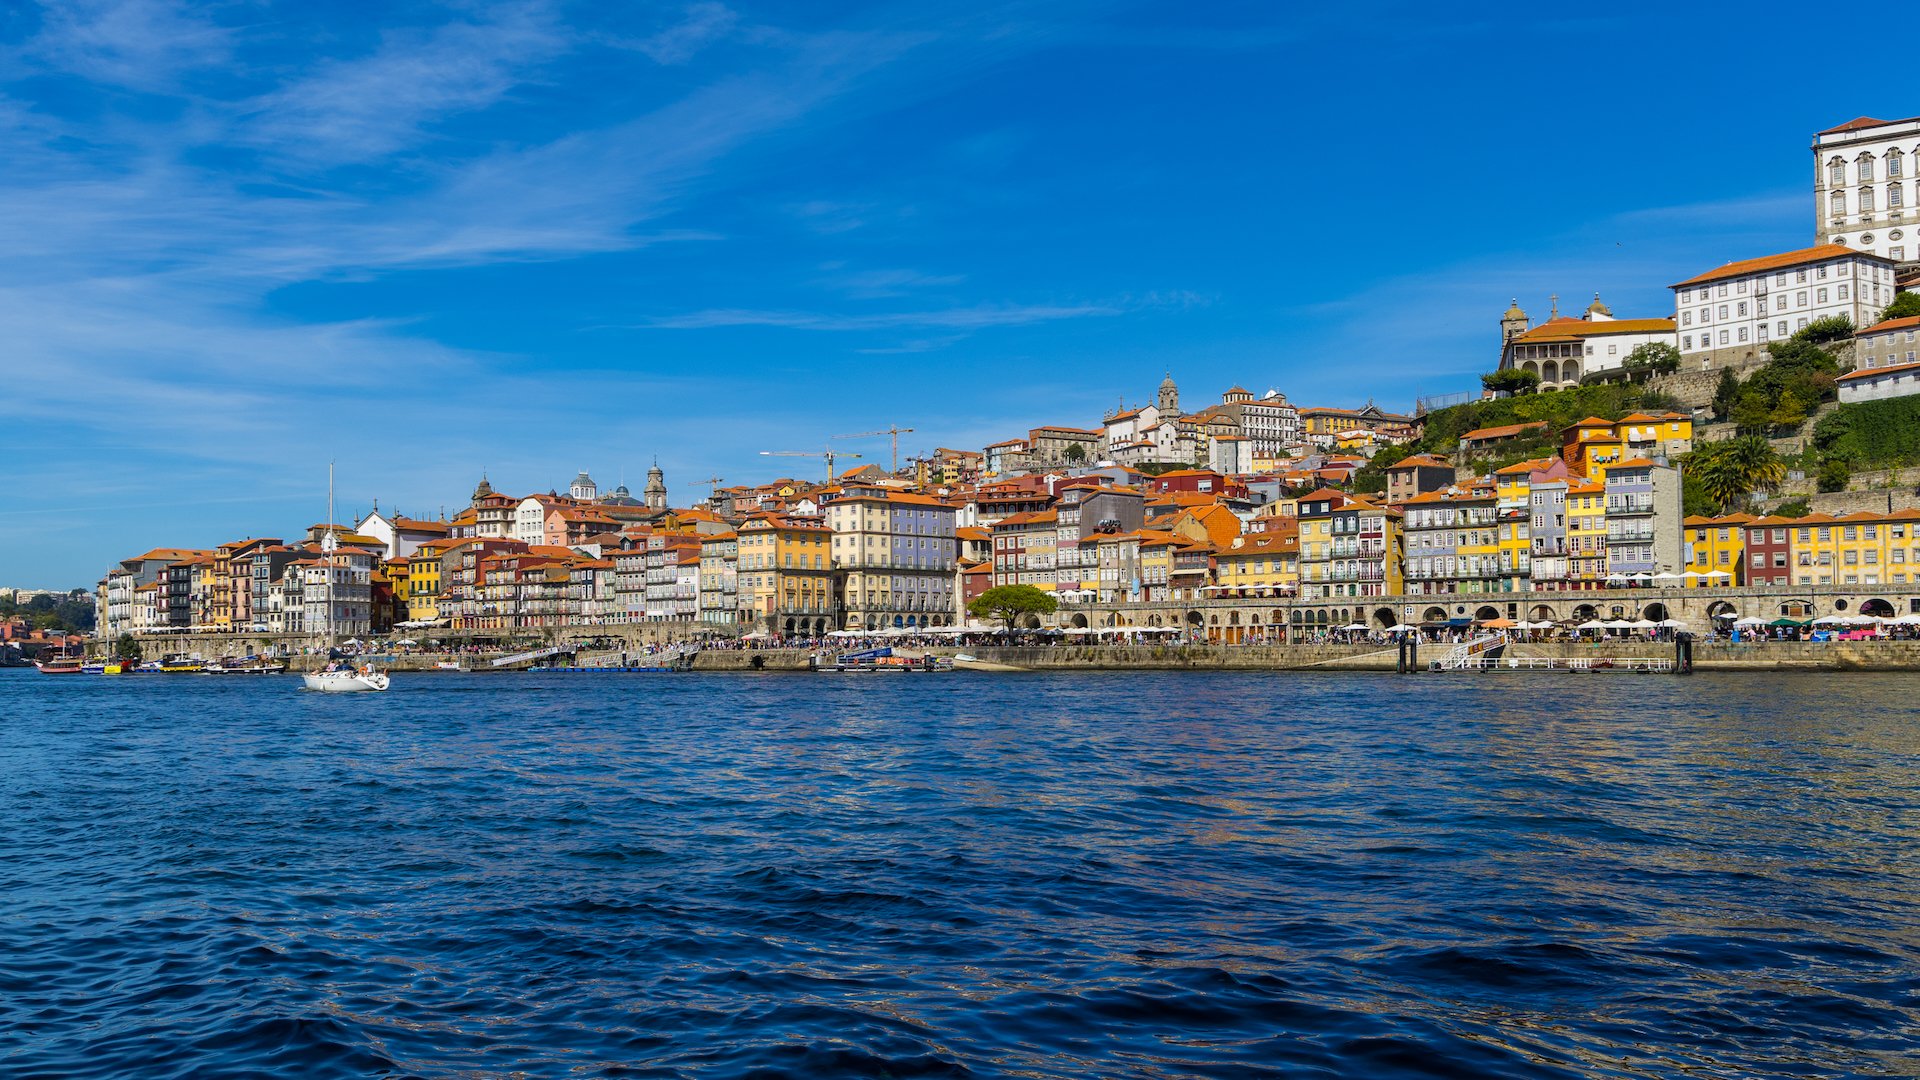  The view of Porto from our boat tour.  